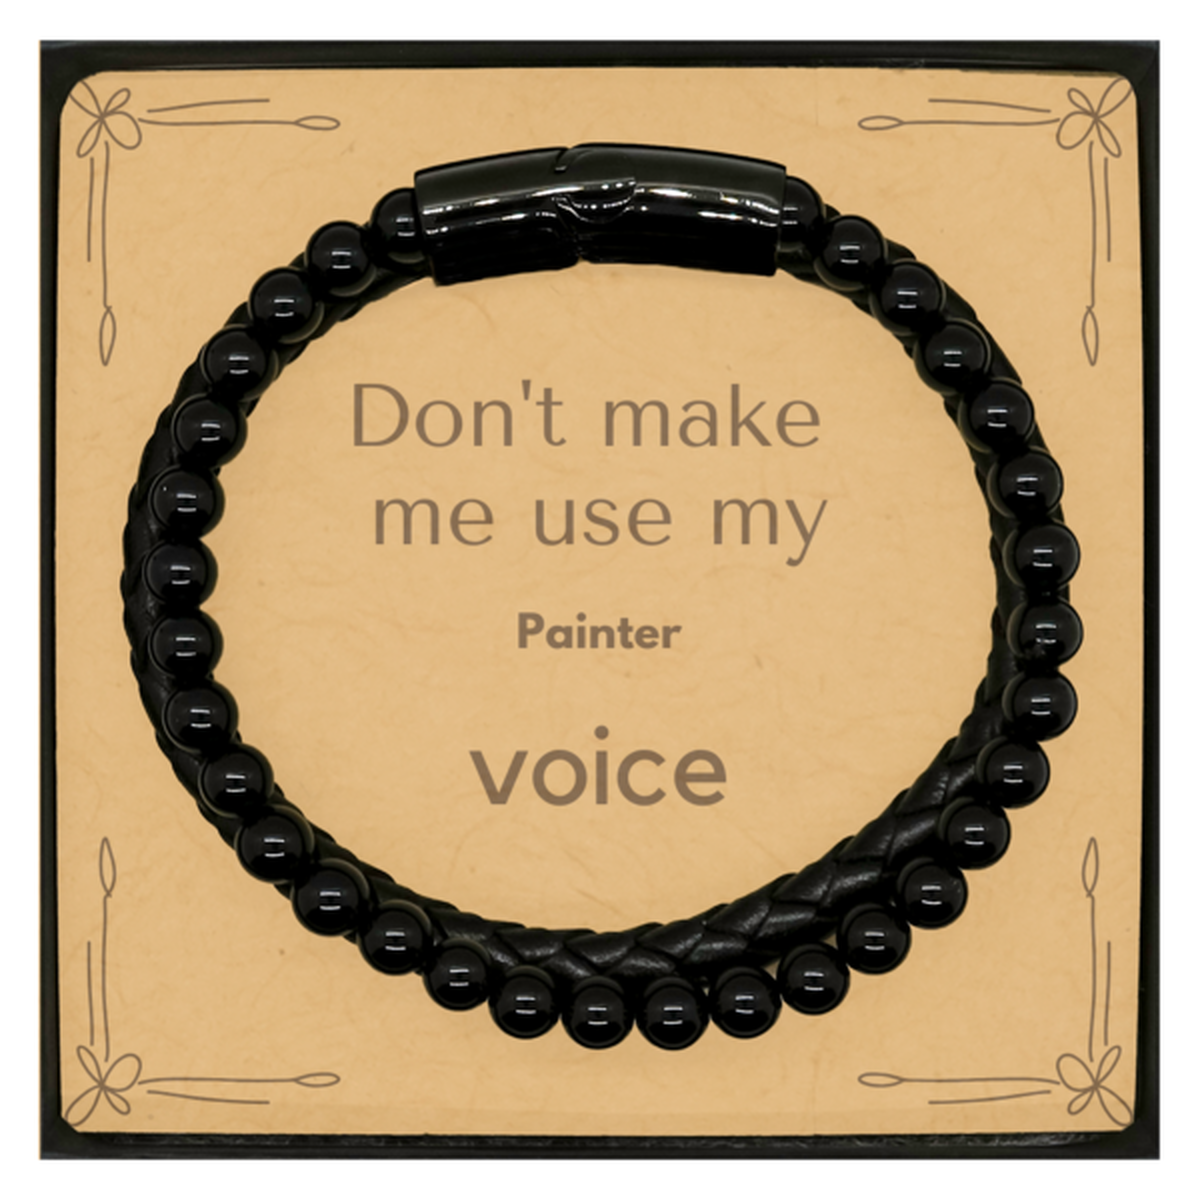 Don't make me use my Painter voice, Sarcasm Painter Card Gifts, Christmas Painter Stone Leather Bracelets Birthday Unique Gifts For Painter Coworkers, Men, Women, Colleague, Friends